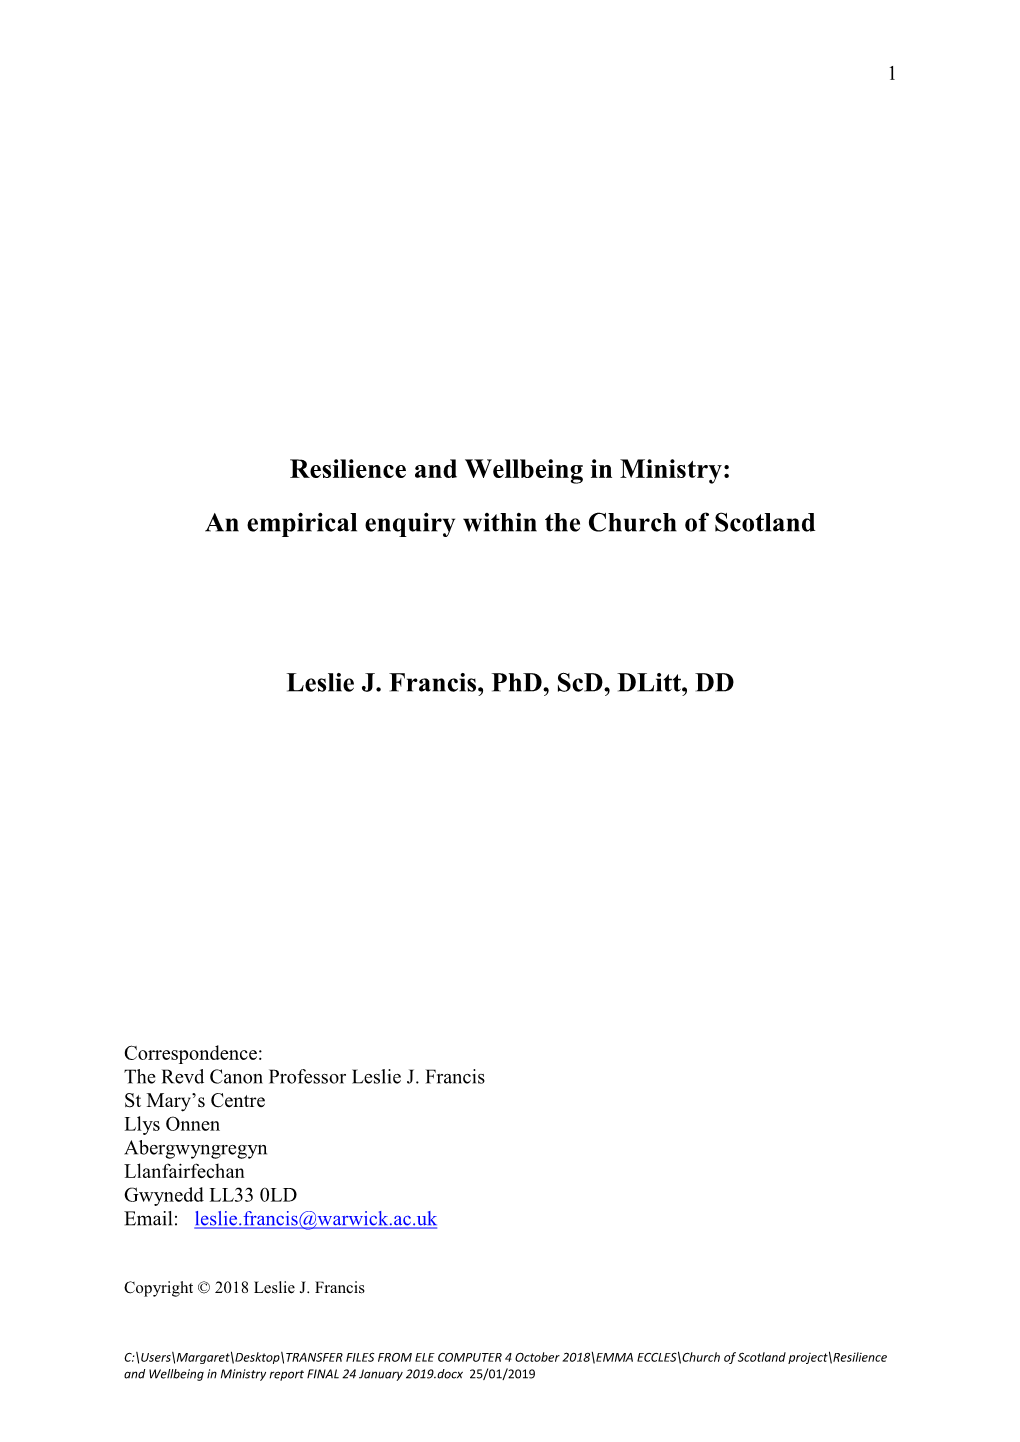 Resilience and Wellbeing in Ministry: an Empirical Enquiry Within the Church of Scotland